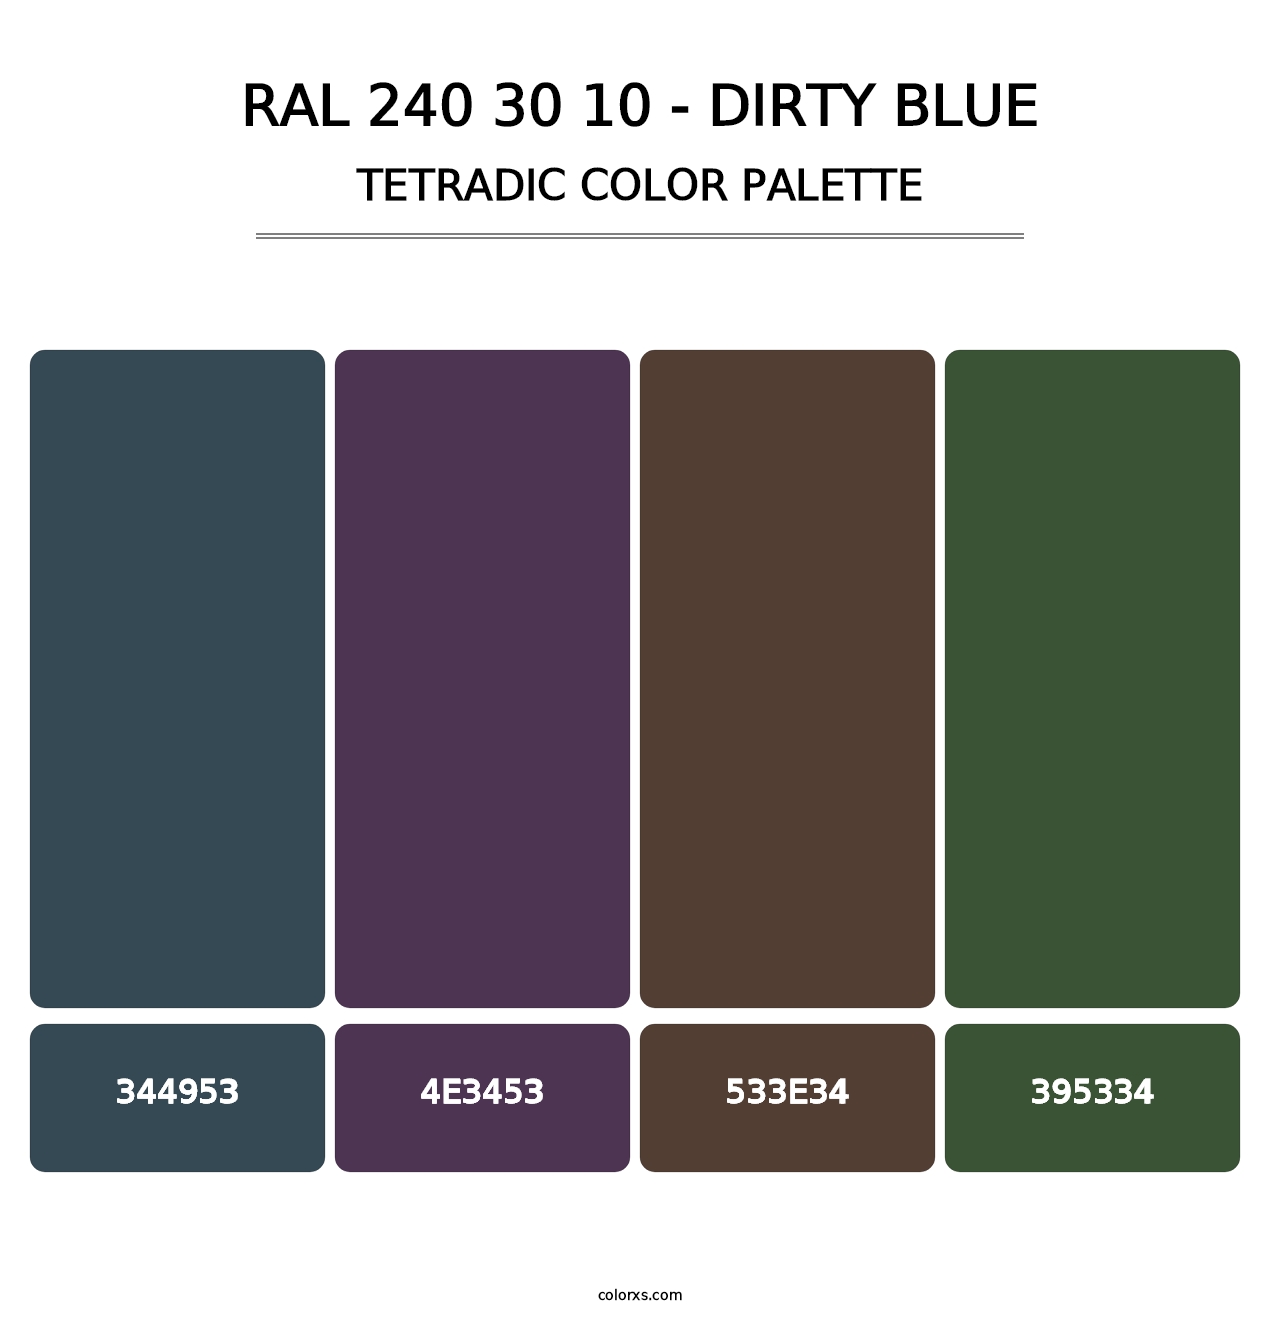 RAL 240 30 10 - Dirty Blue - Tetradic Color Palette